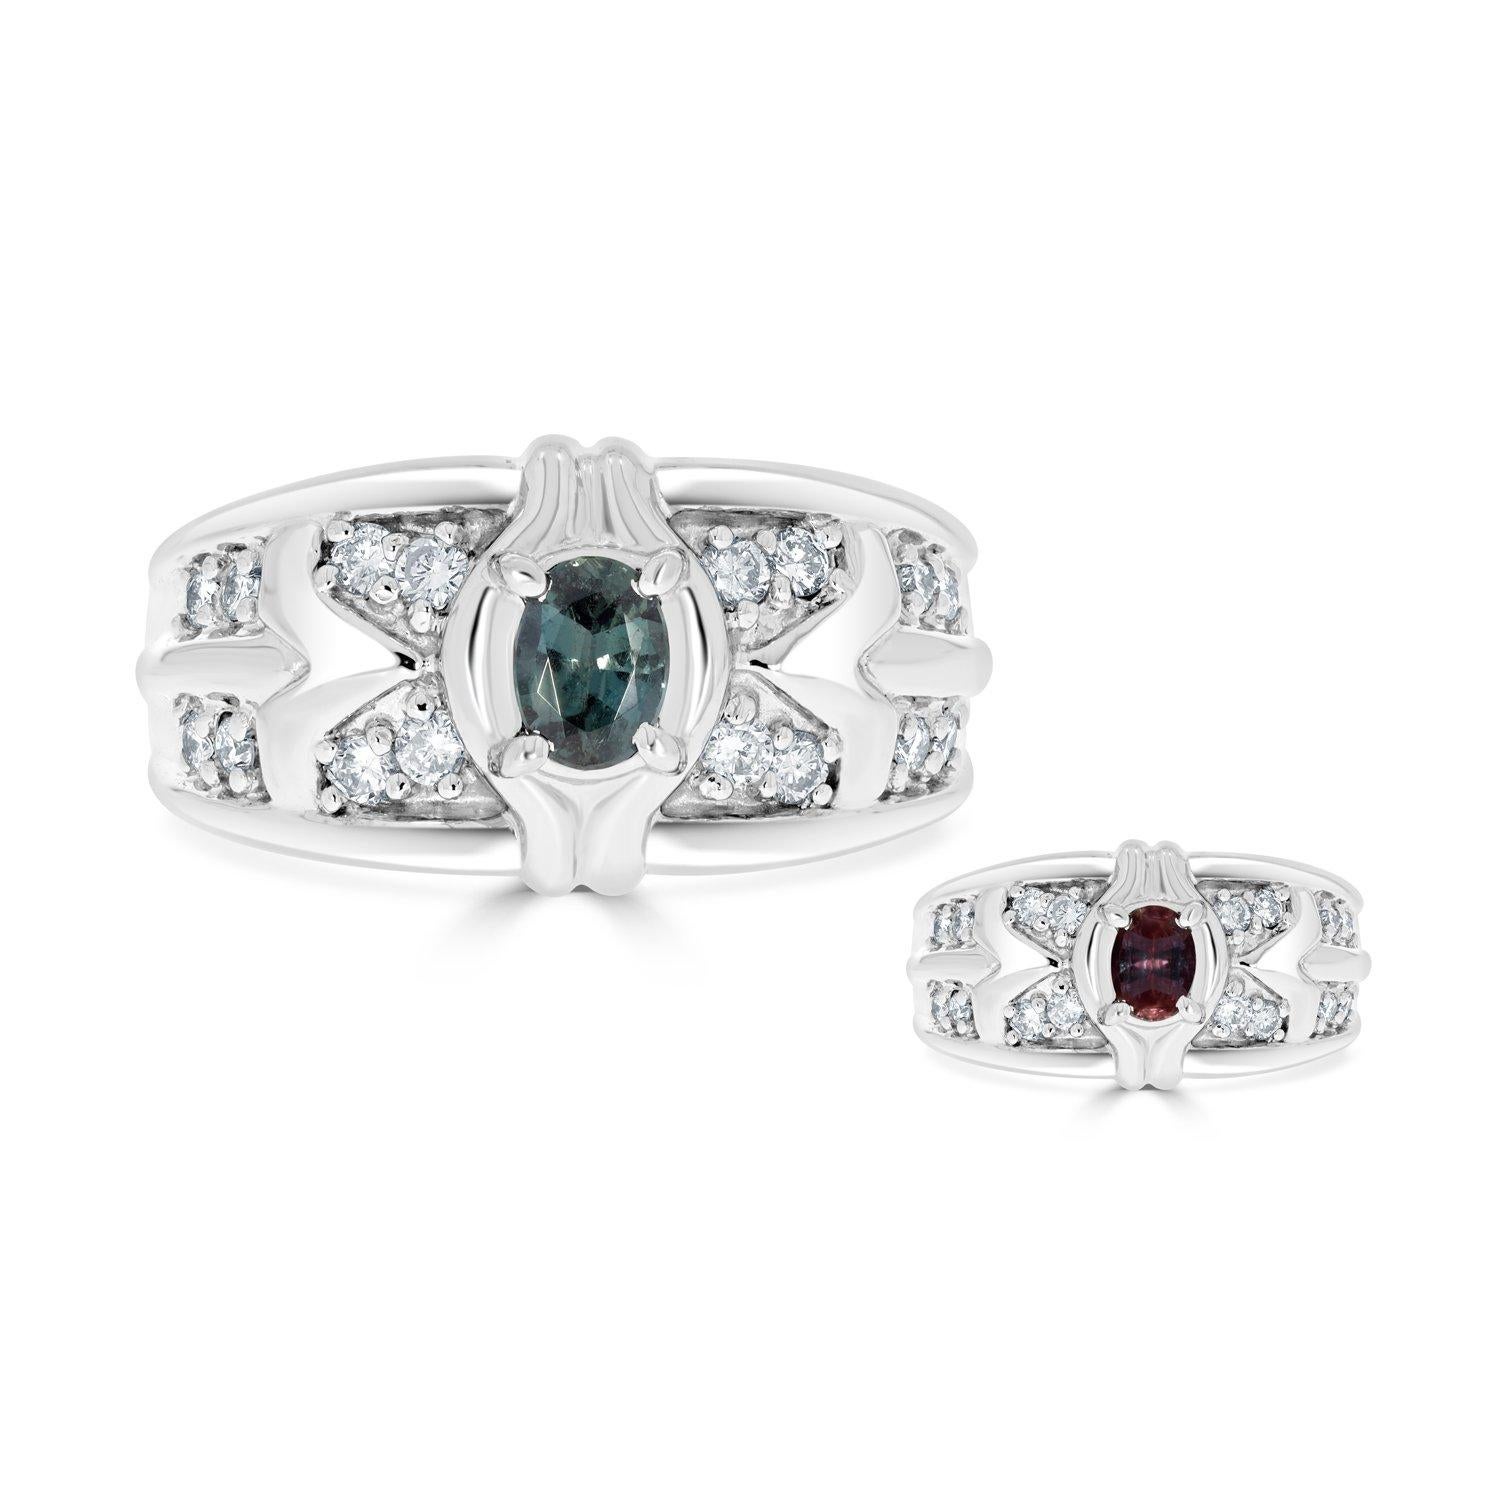 0.41ct Alexandrite Rings with 0.33tct Diamonds Set in Platinum 900 For Sale 2